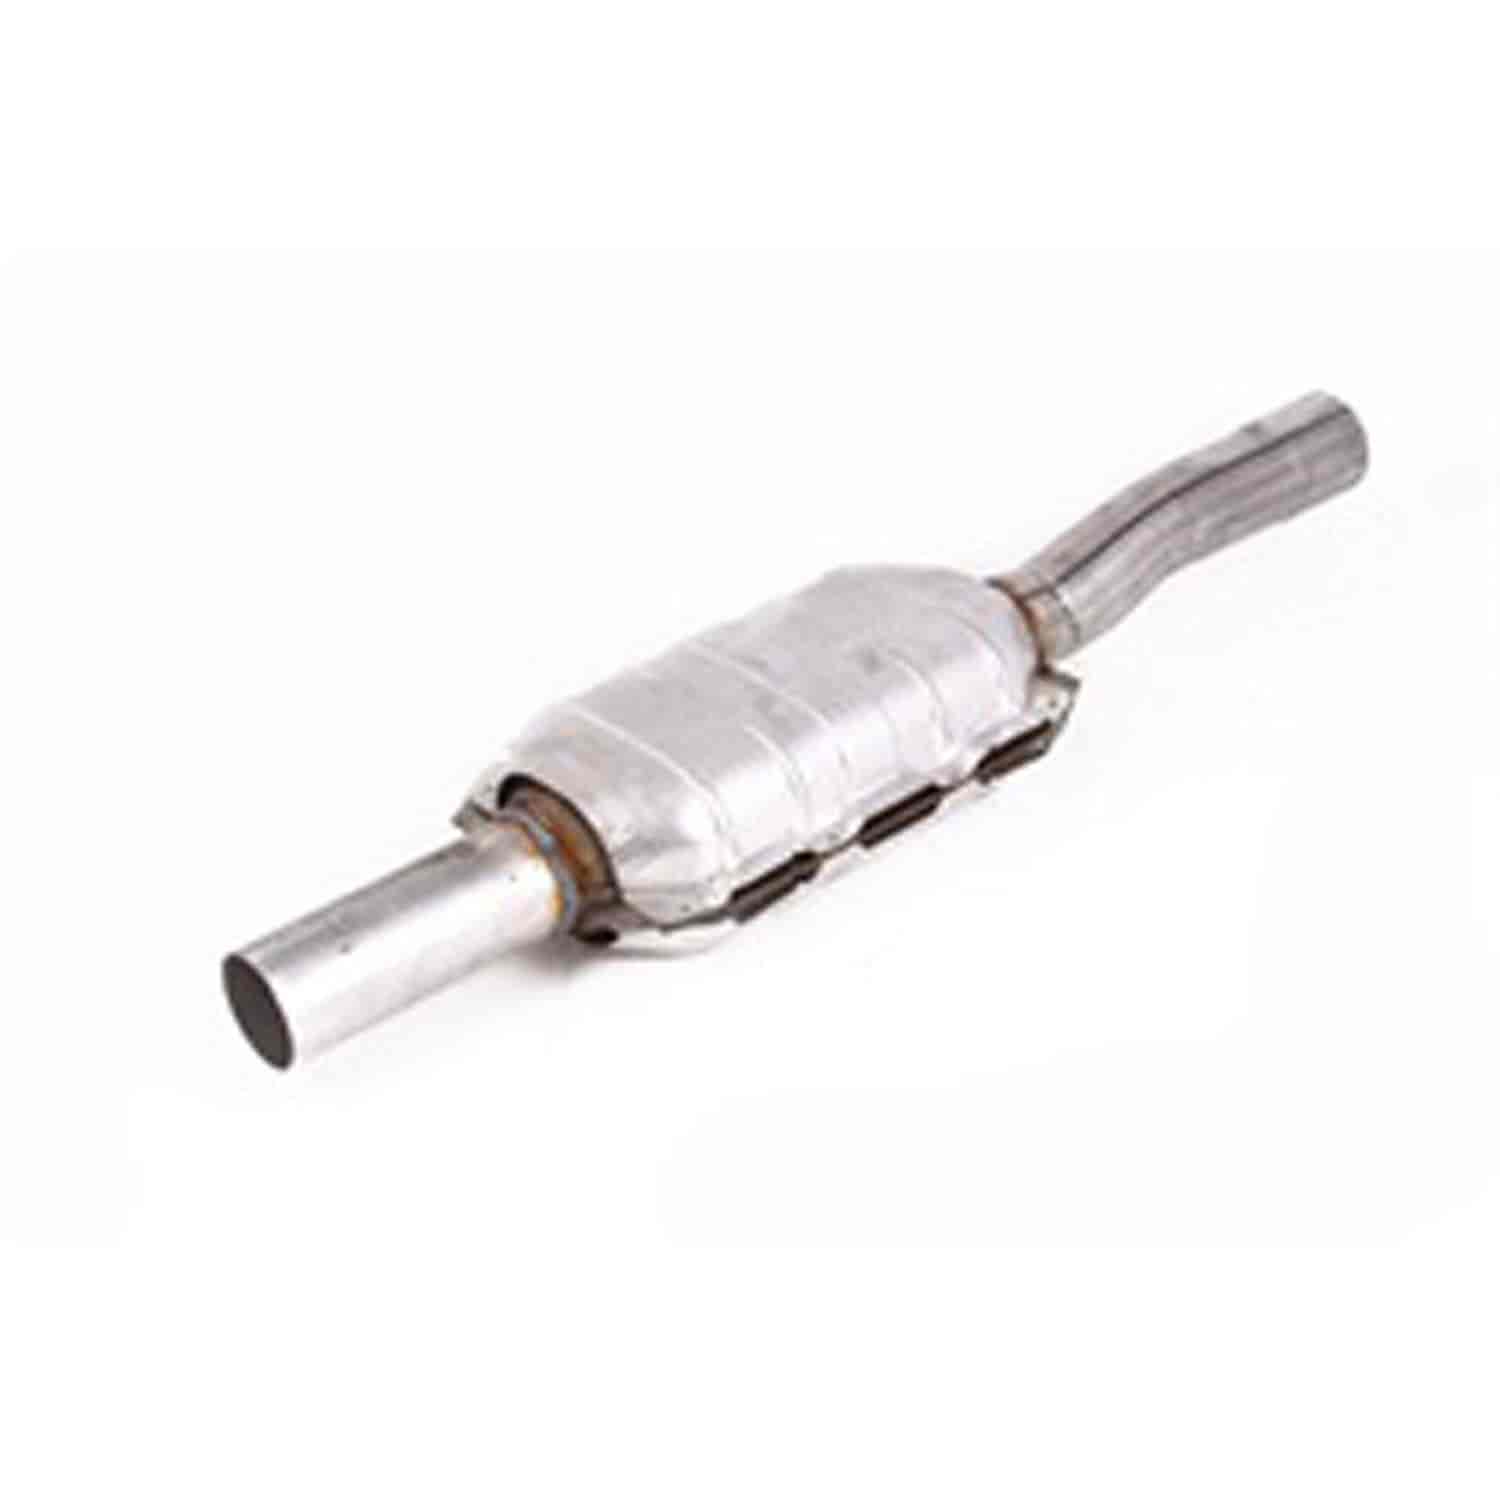 Catalytic Converter For 2002-2004 Jeep Grand Cherokee 4.0L and 4.7L EPA 49 State Certified By Omix-ADA